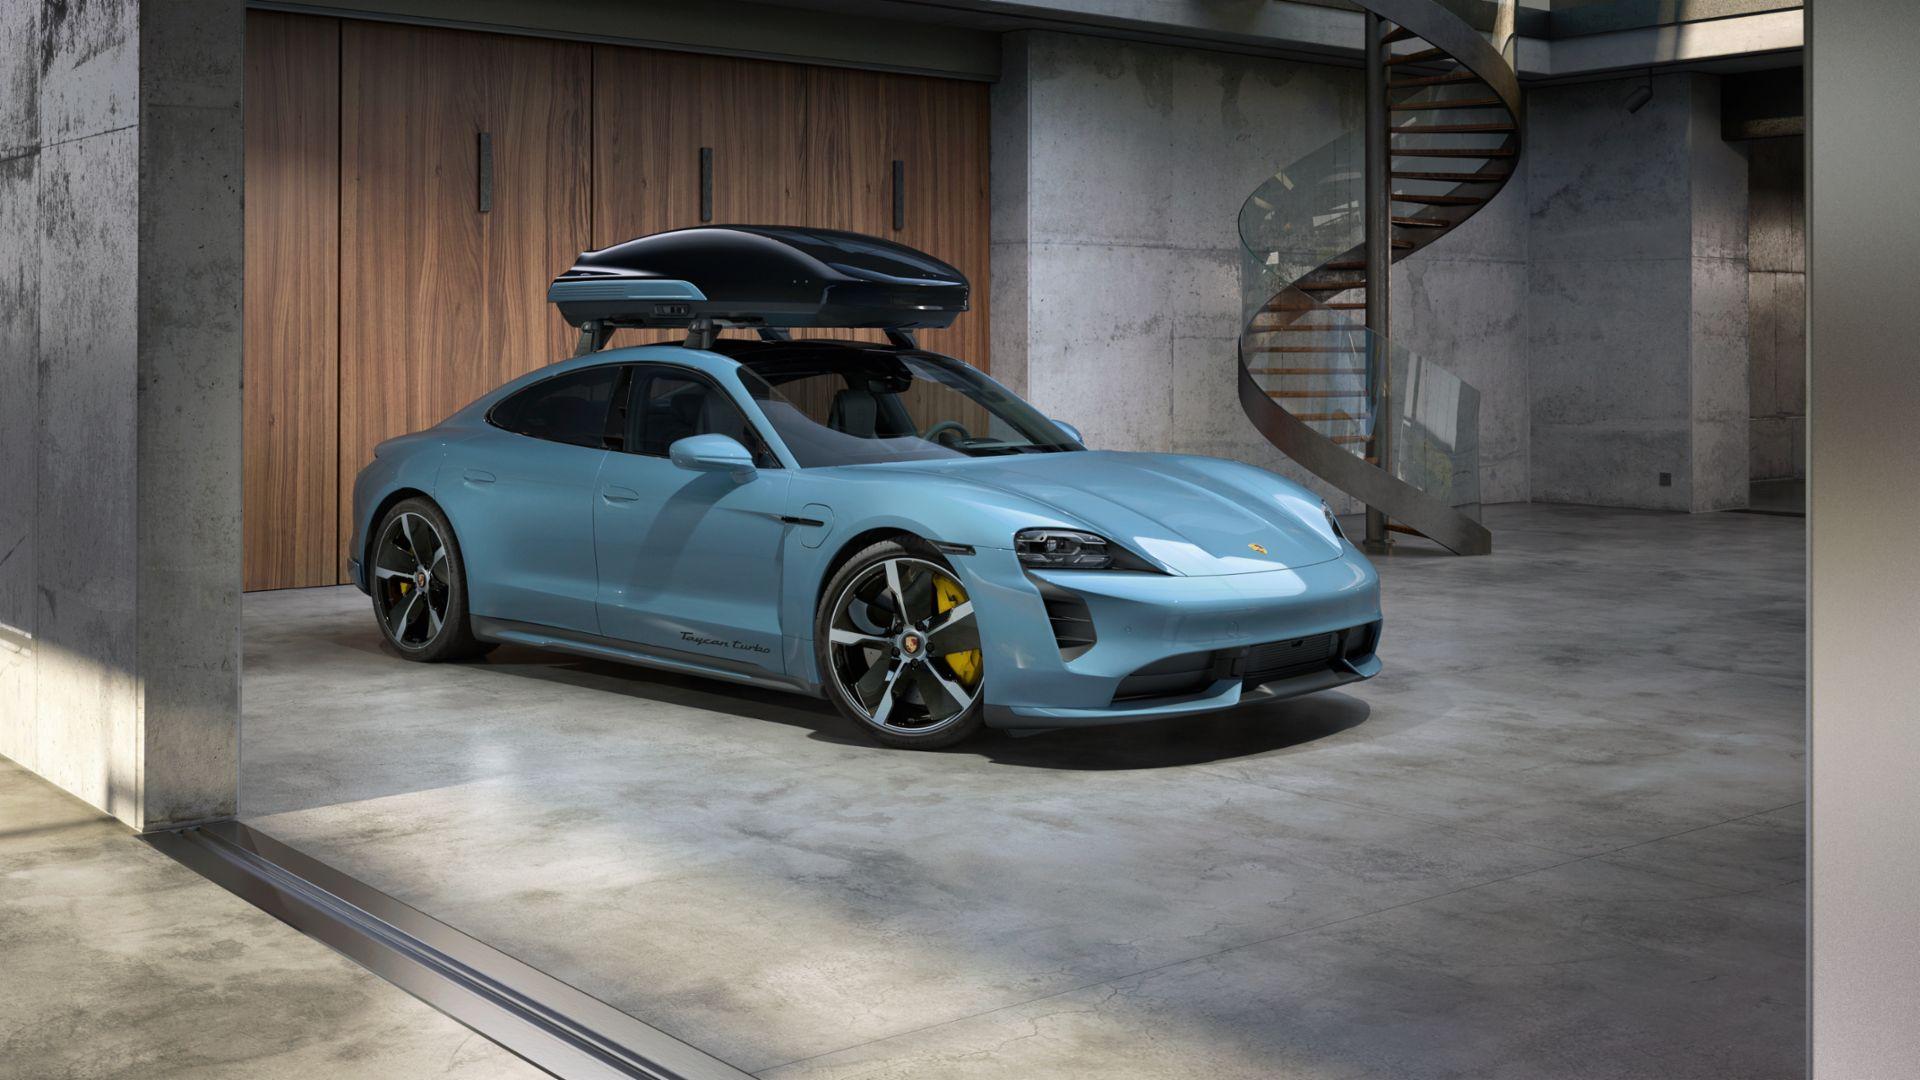 The Performance roof box by Porsche Tequipment blends practicality with sleek styling and aerodynamic efficiency.